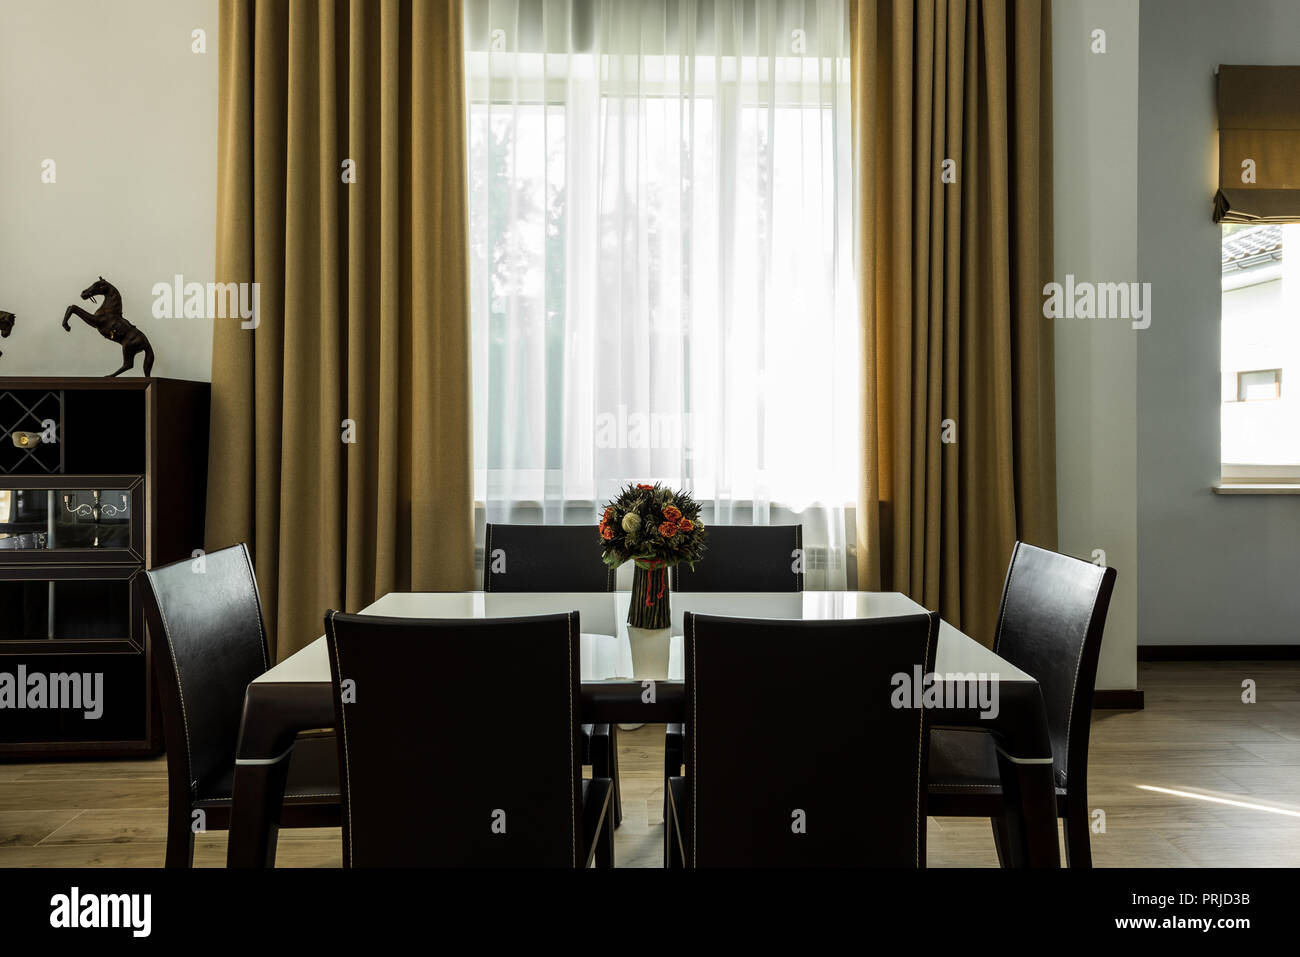 Interior View Of Stylish Dining Room With Table Chairs And Big Window Stock Photo Alamy